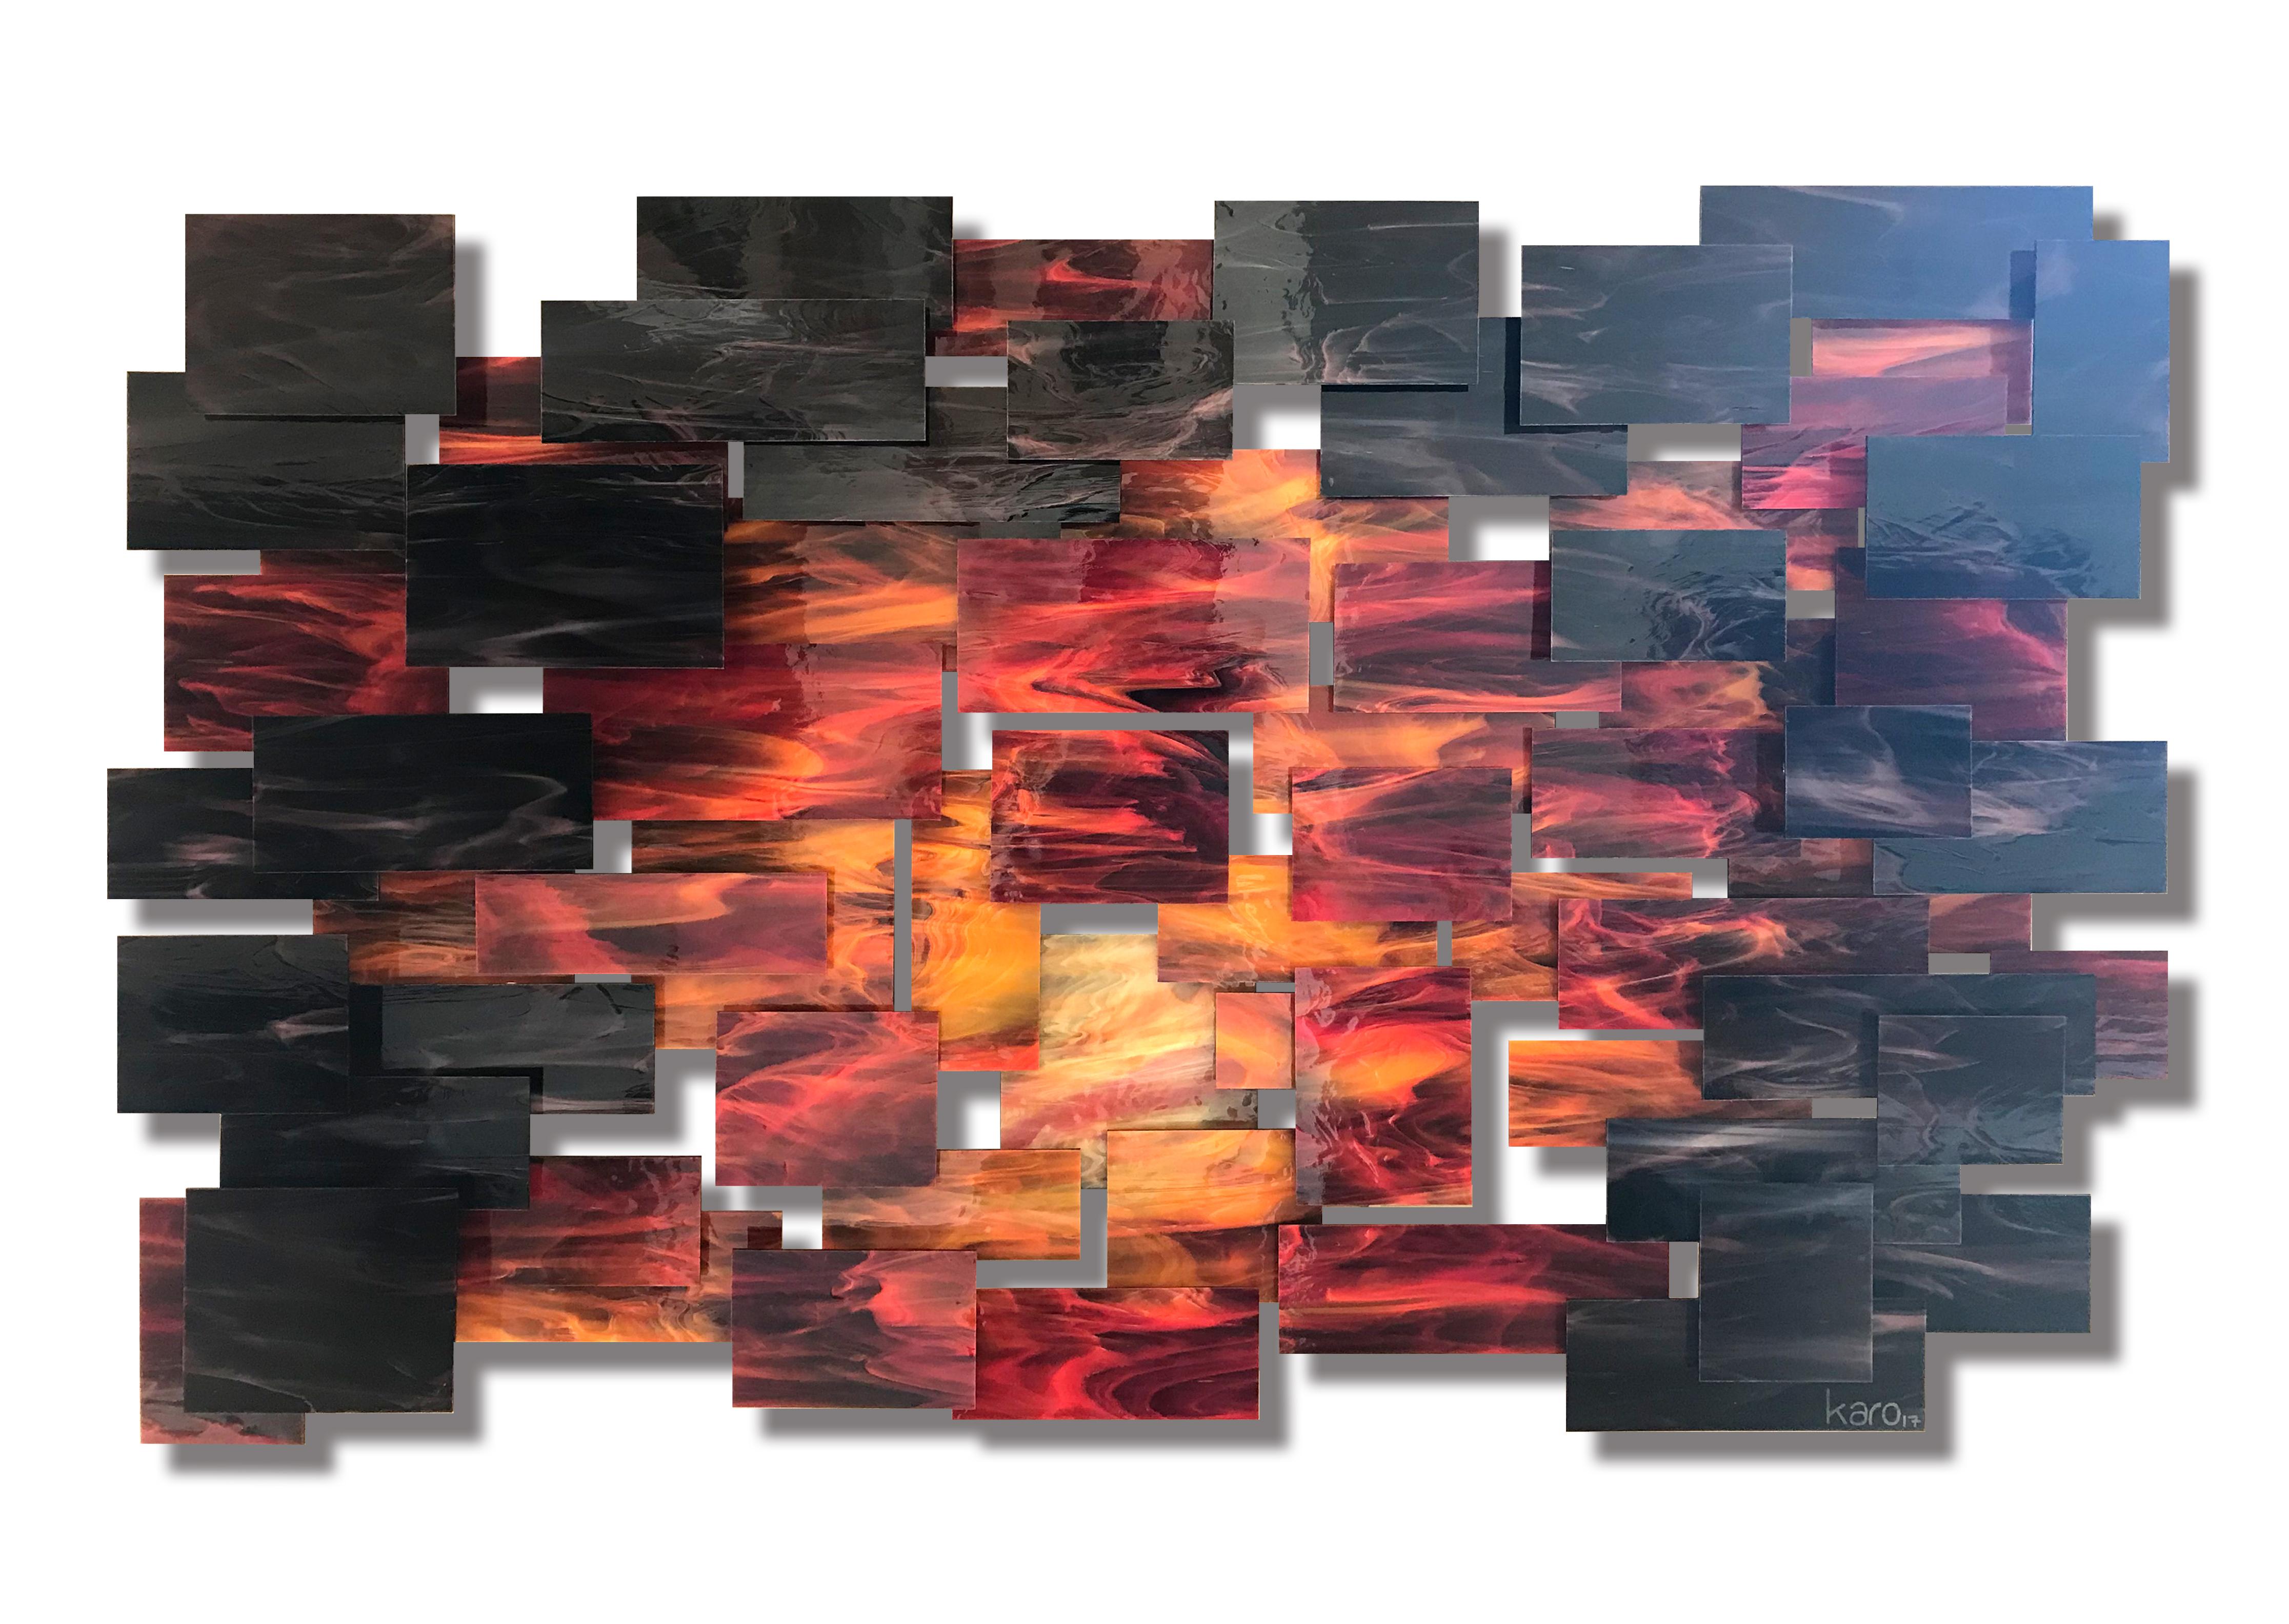 Dusk,  Abstract 3D Original Glass and Metal Wall Sculpture, One of a kind